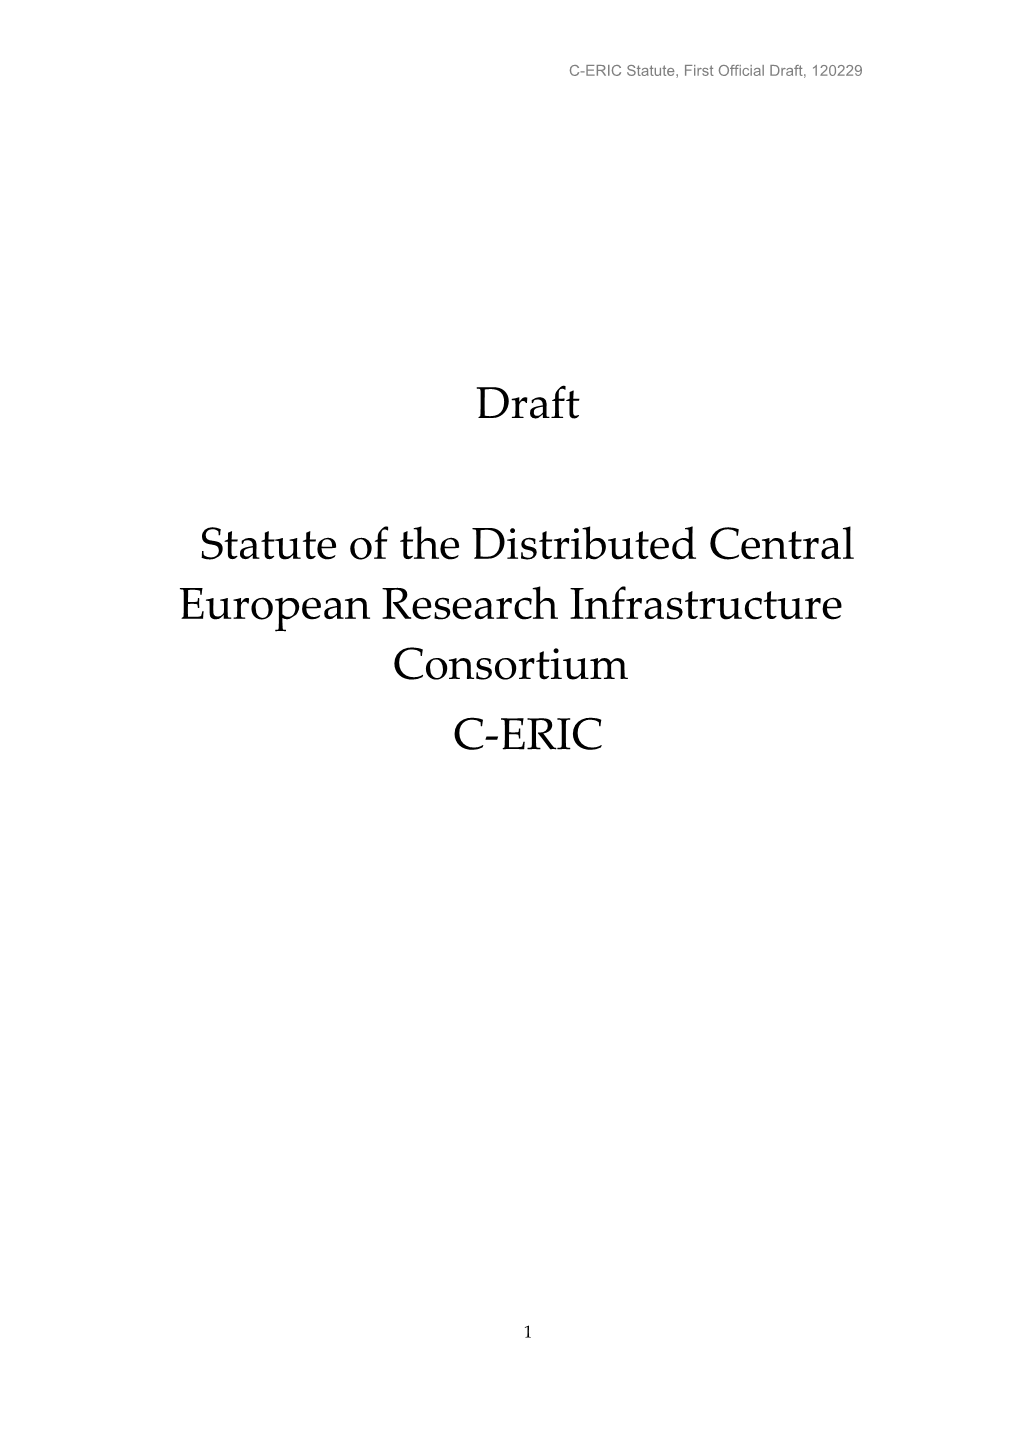 Statute of the Distributed Central European Research Infrastructure Consortium